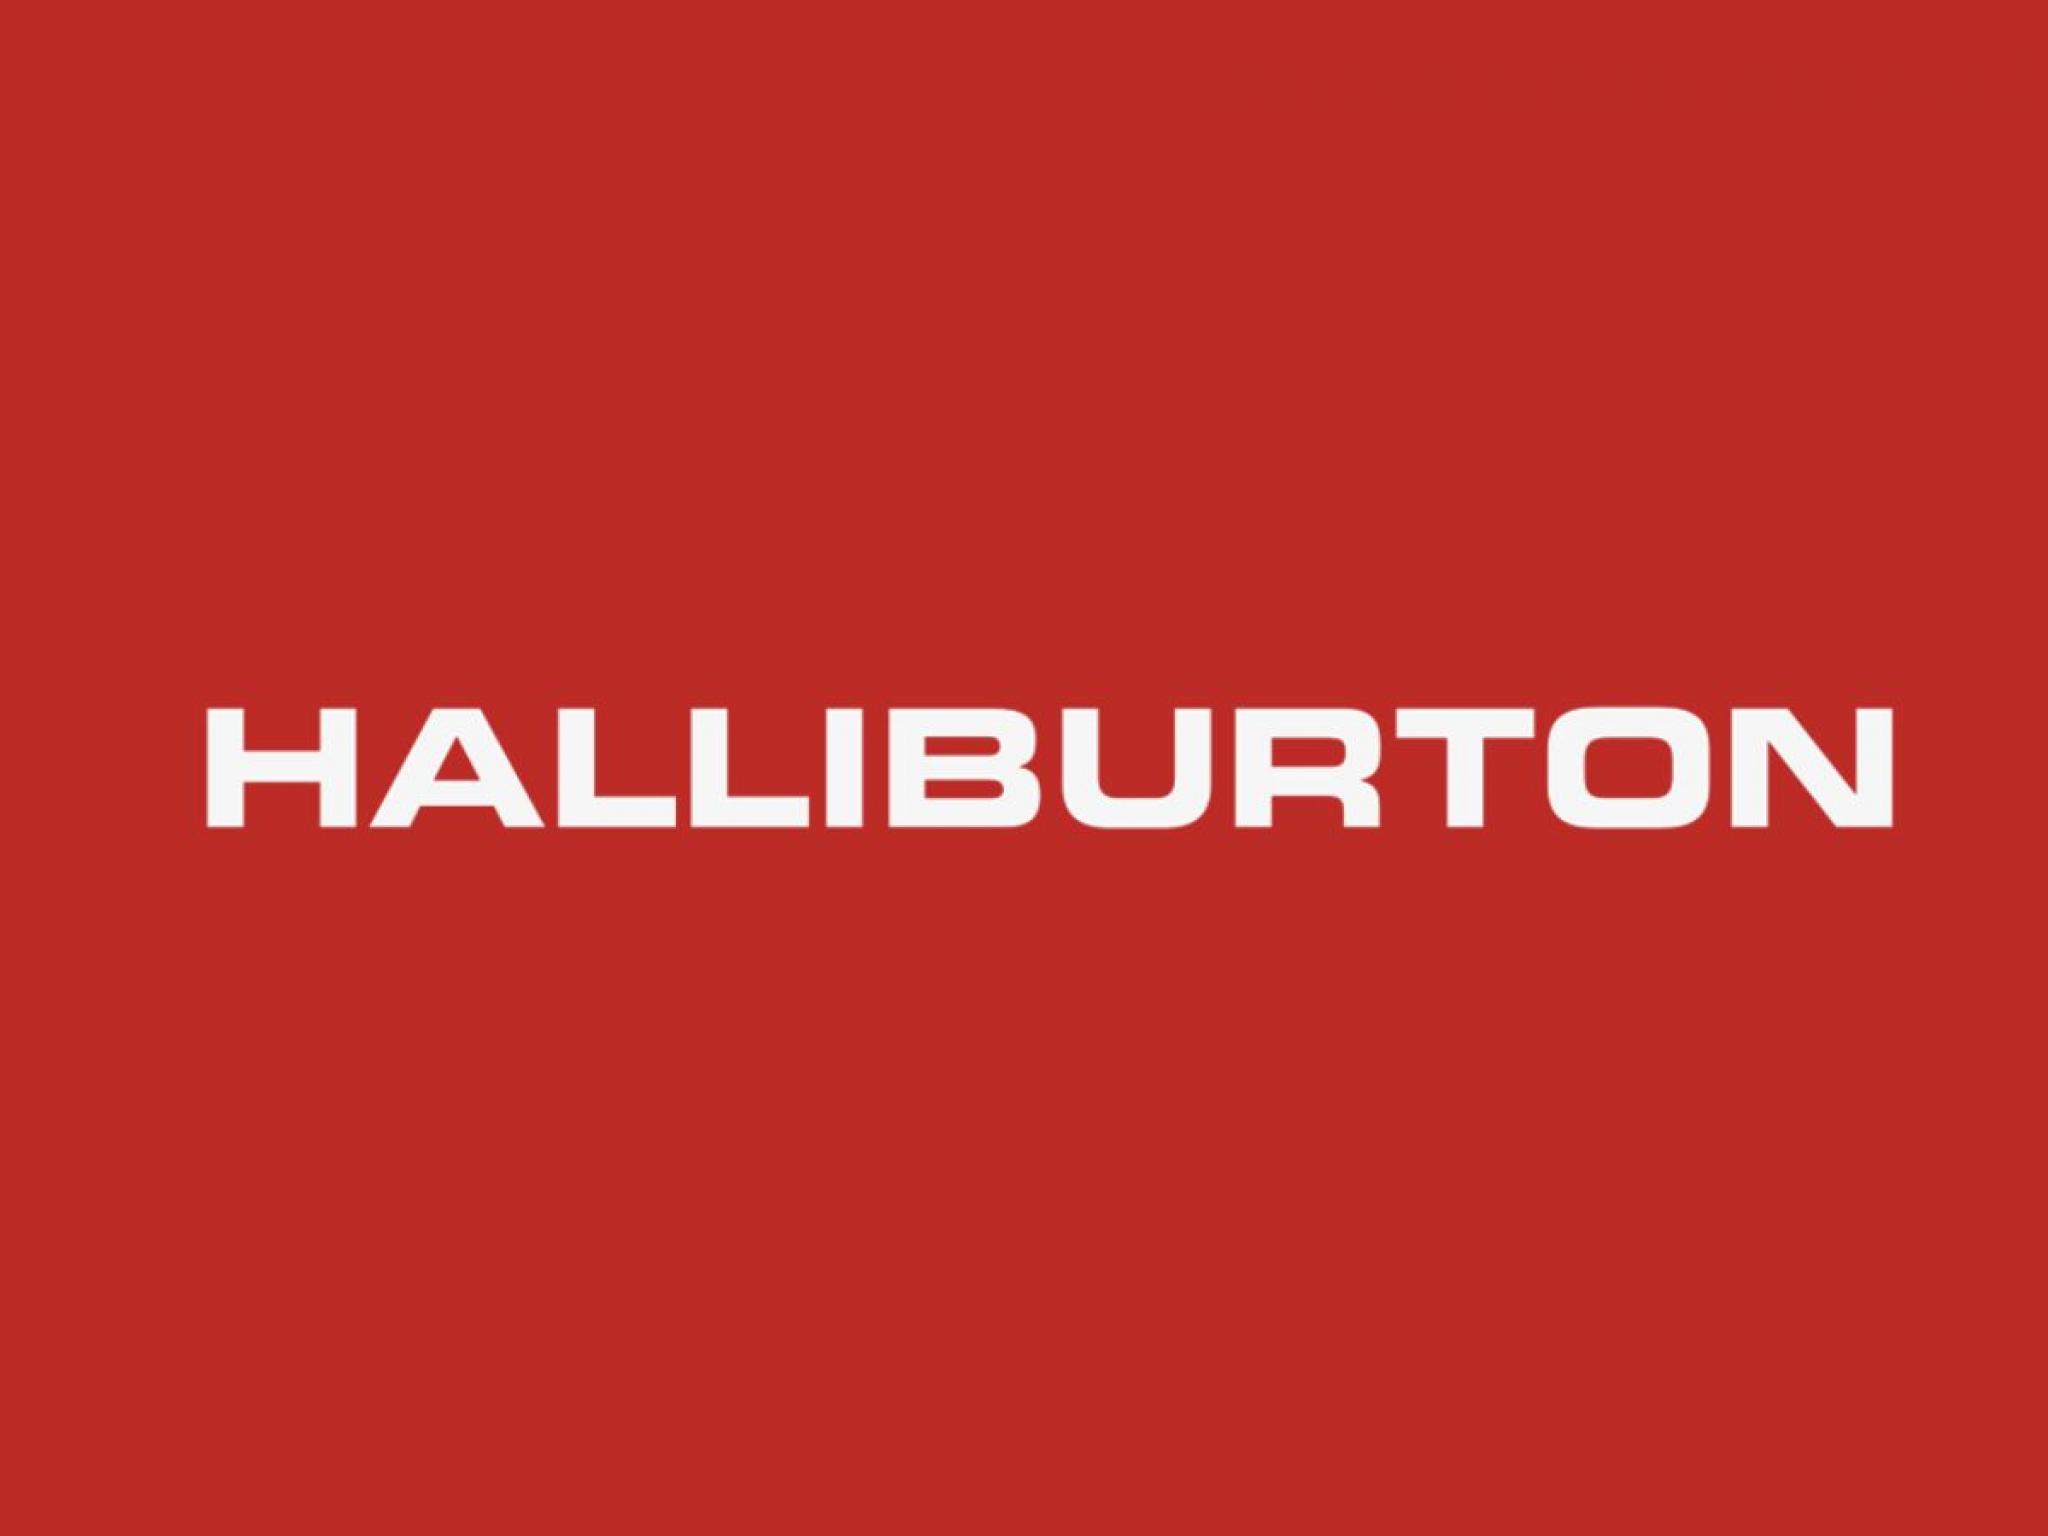  halliburton-signet-jewelers-and-2-other-stocks-insiders-are-selling 